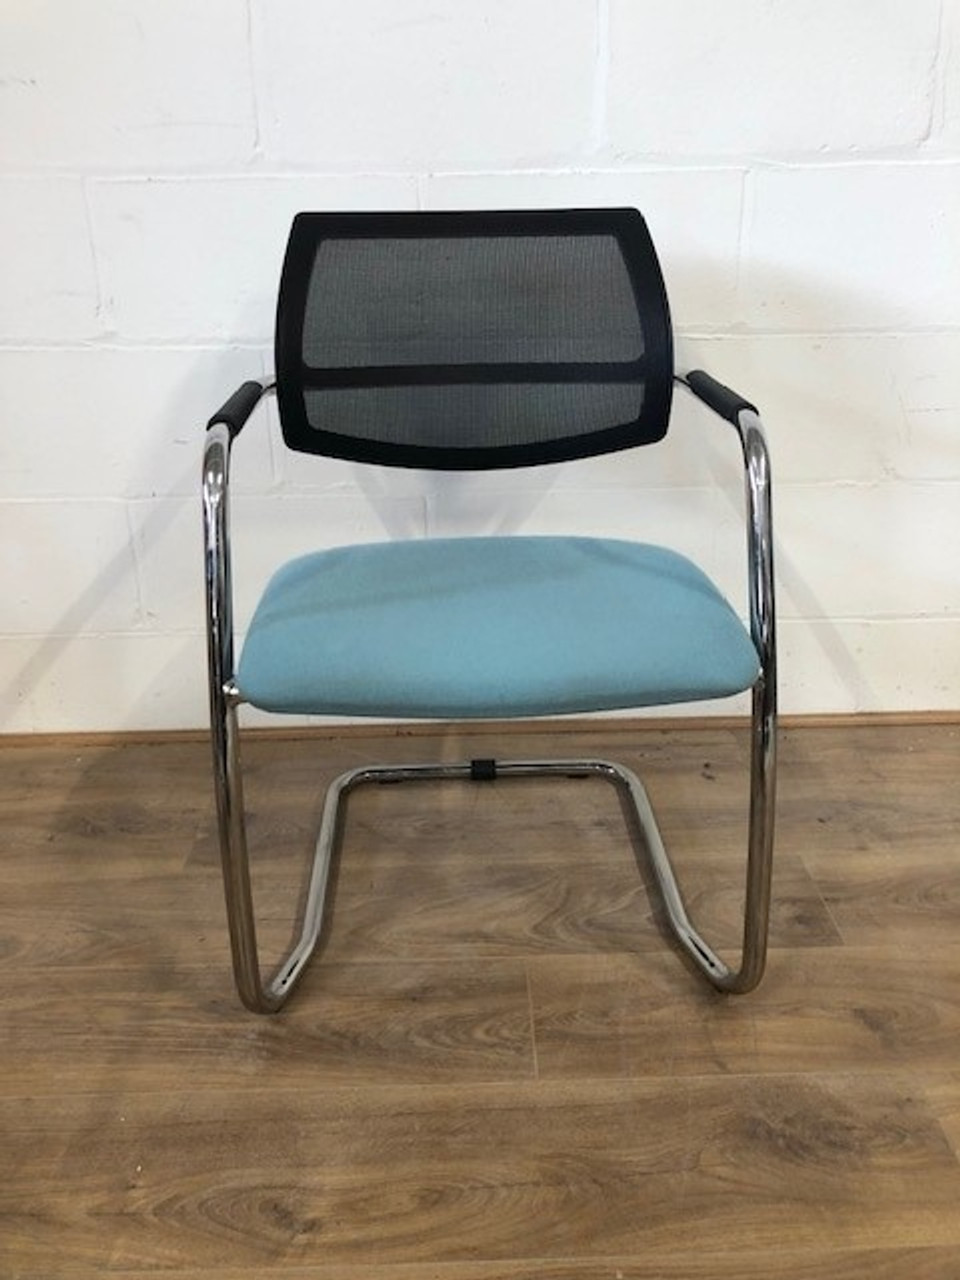 used verco meeting chairs in mint fabric_used office furniture essex_second hand office furniture essex_2nd hand office furniture essex 1